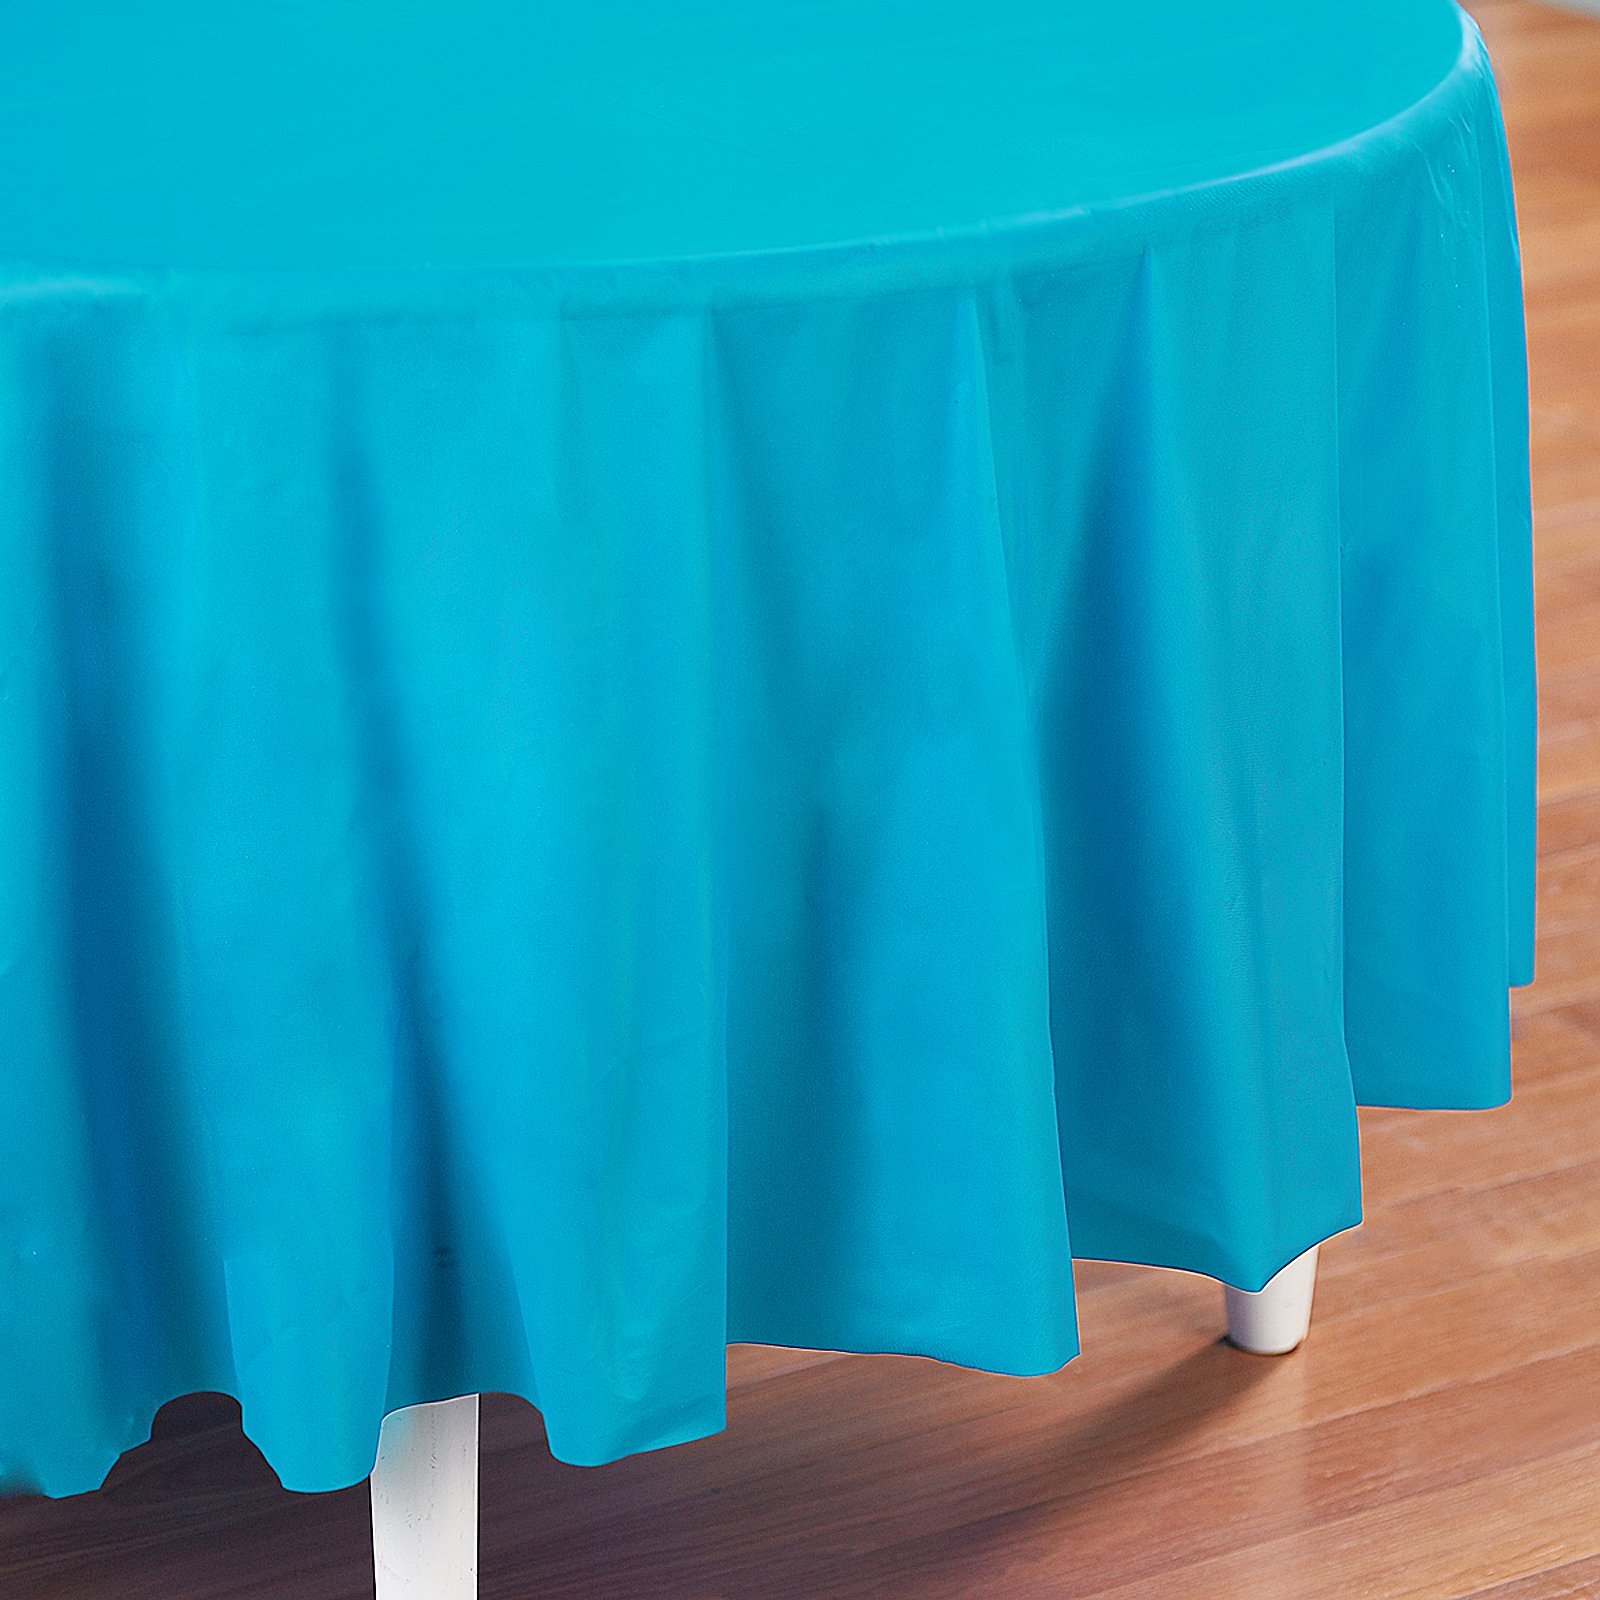 Bermuda Blue (Turquoise) Round Plastic Tablecover - Click Image to Close